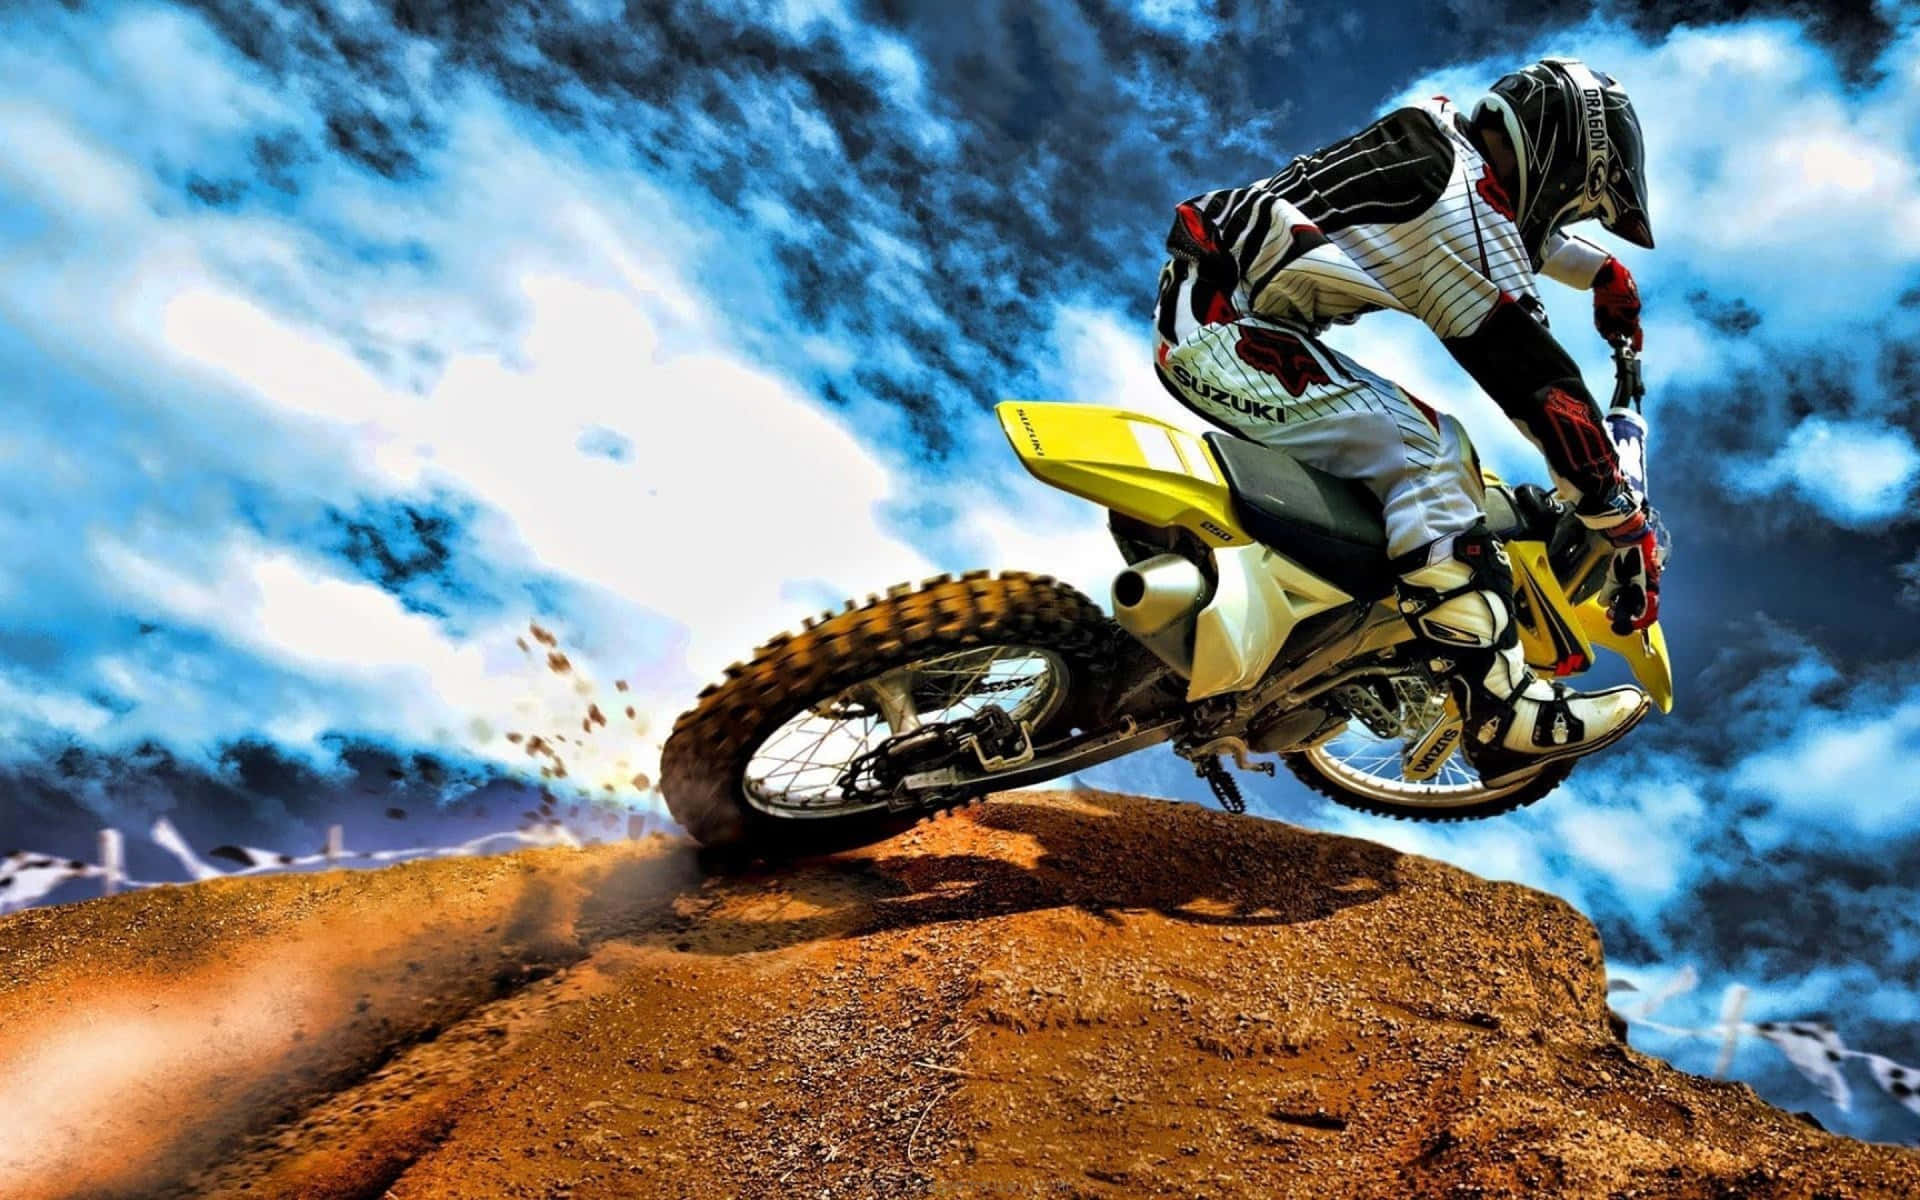 High-speed dirt bike action on a rugged trail